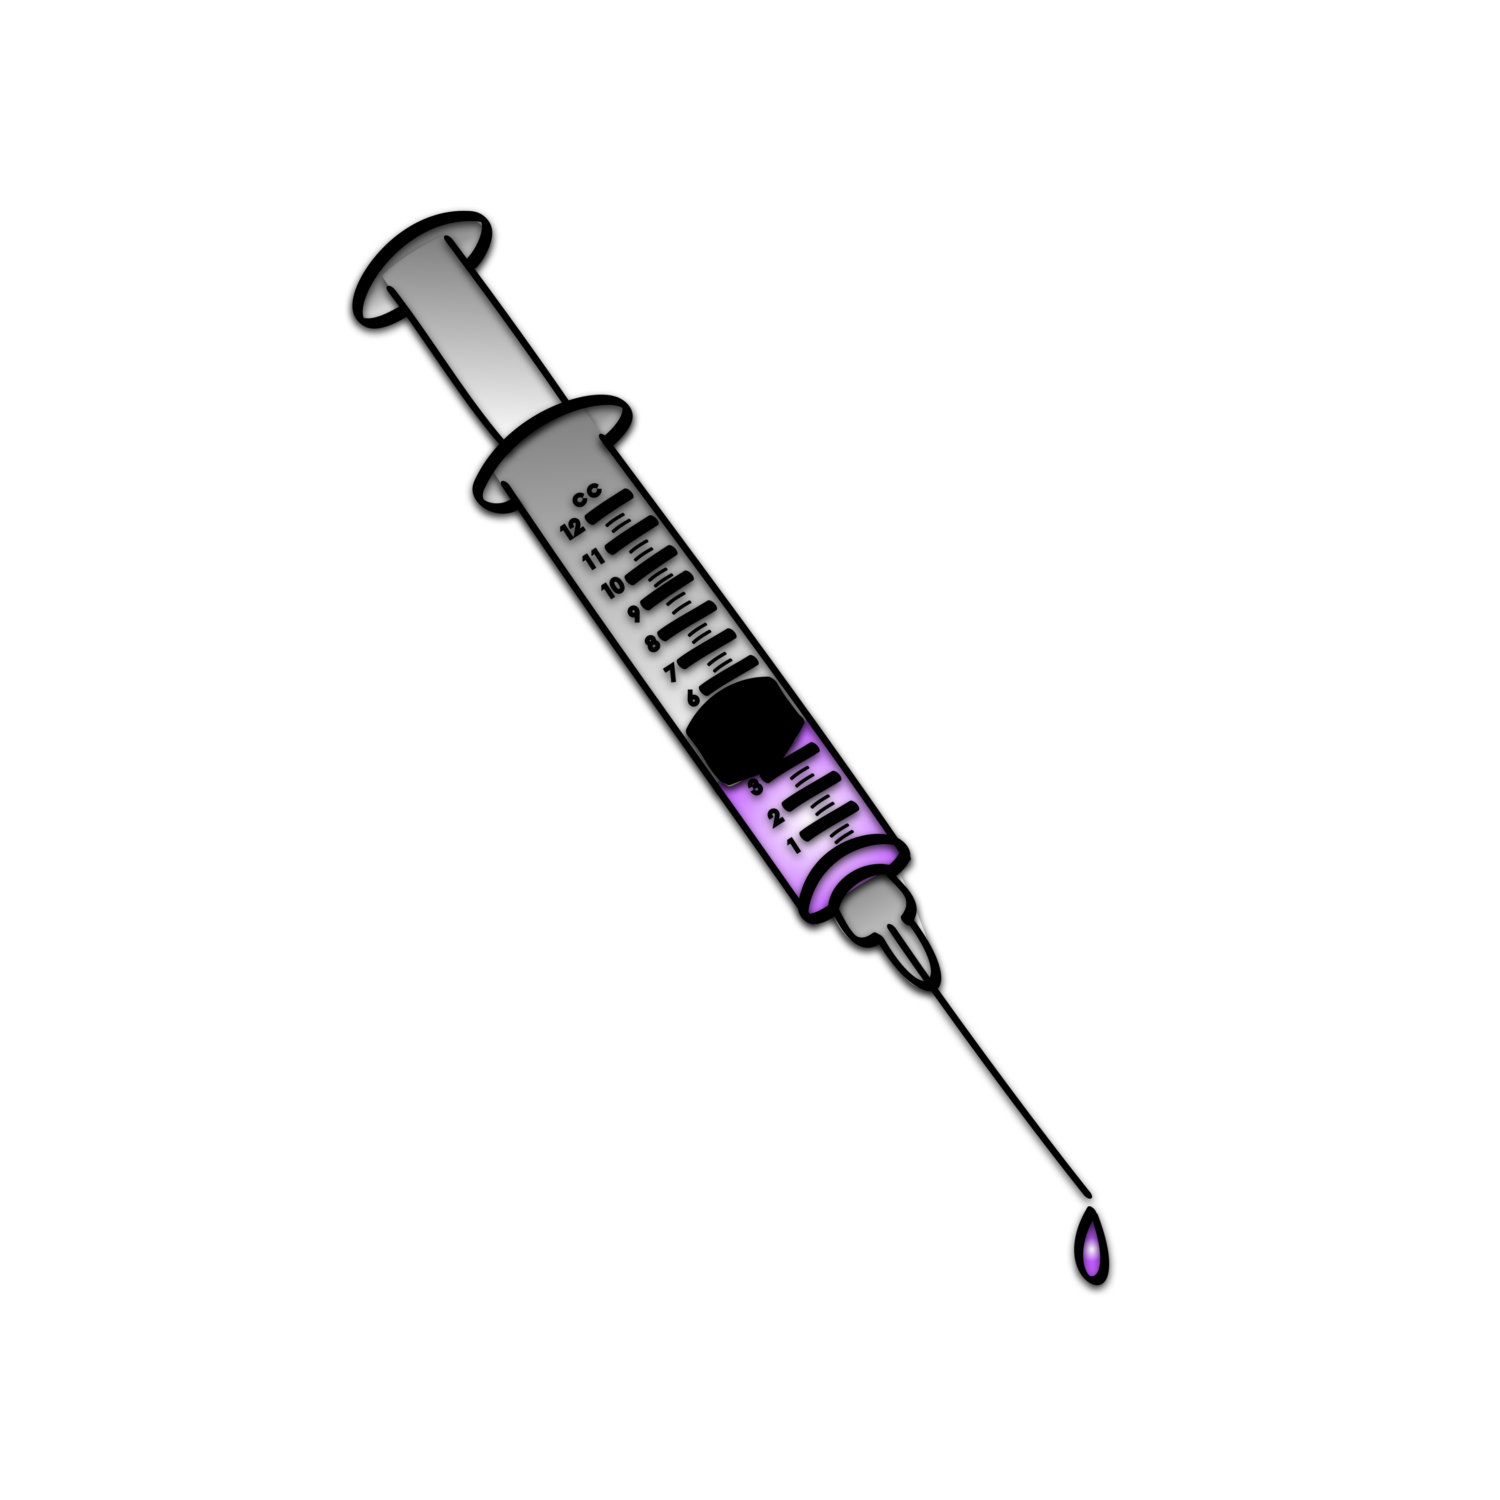 Medical Syringes and Needles Clip Art.